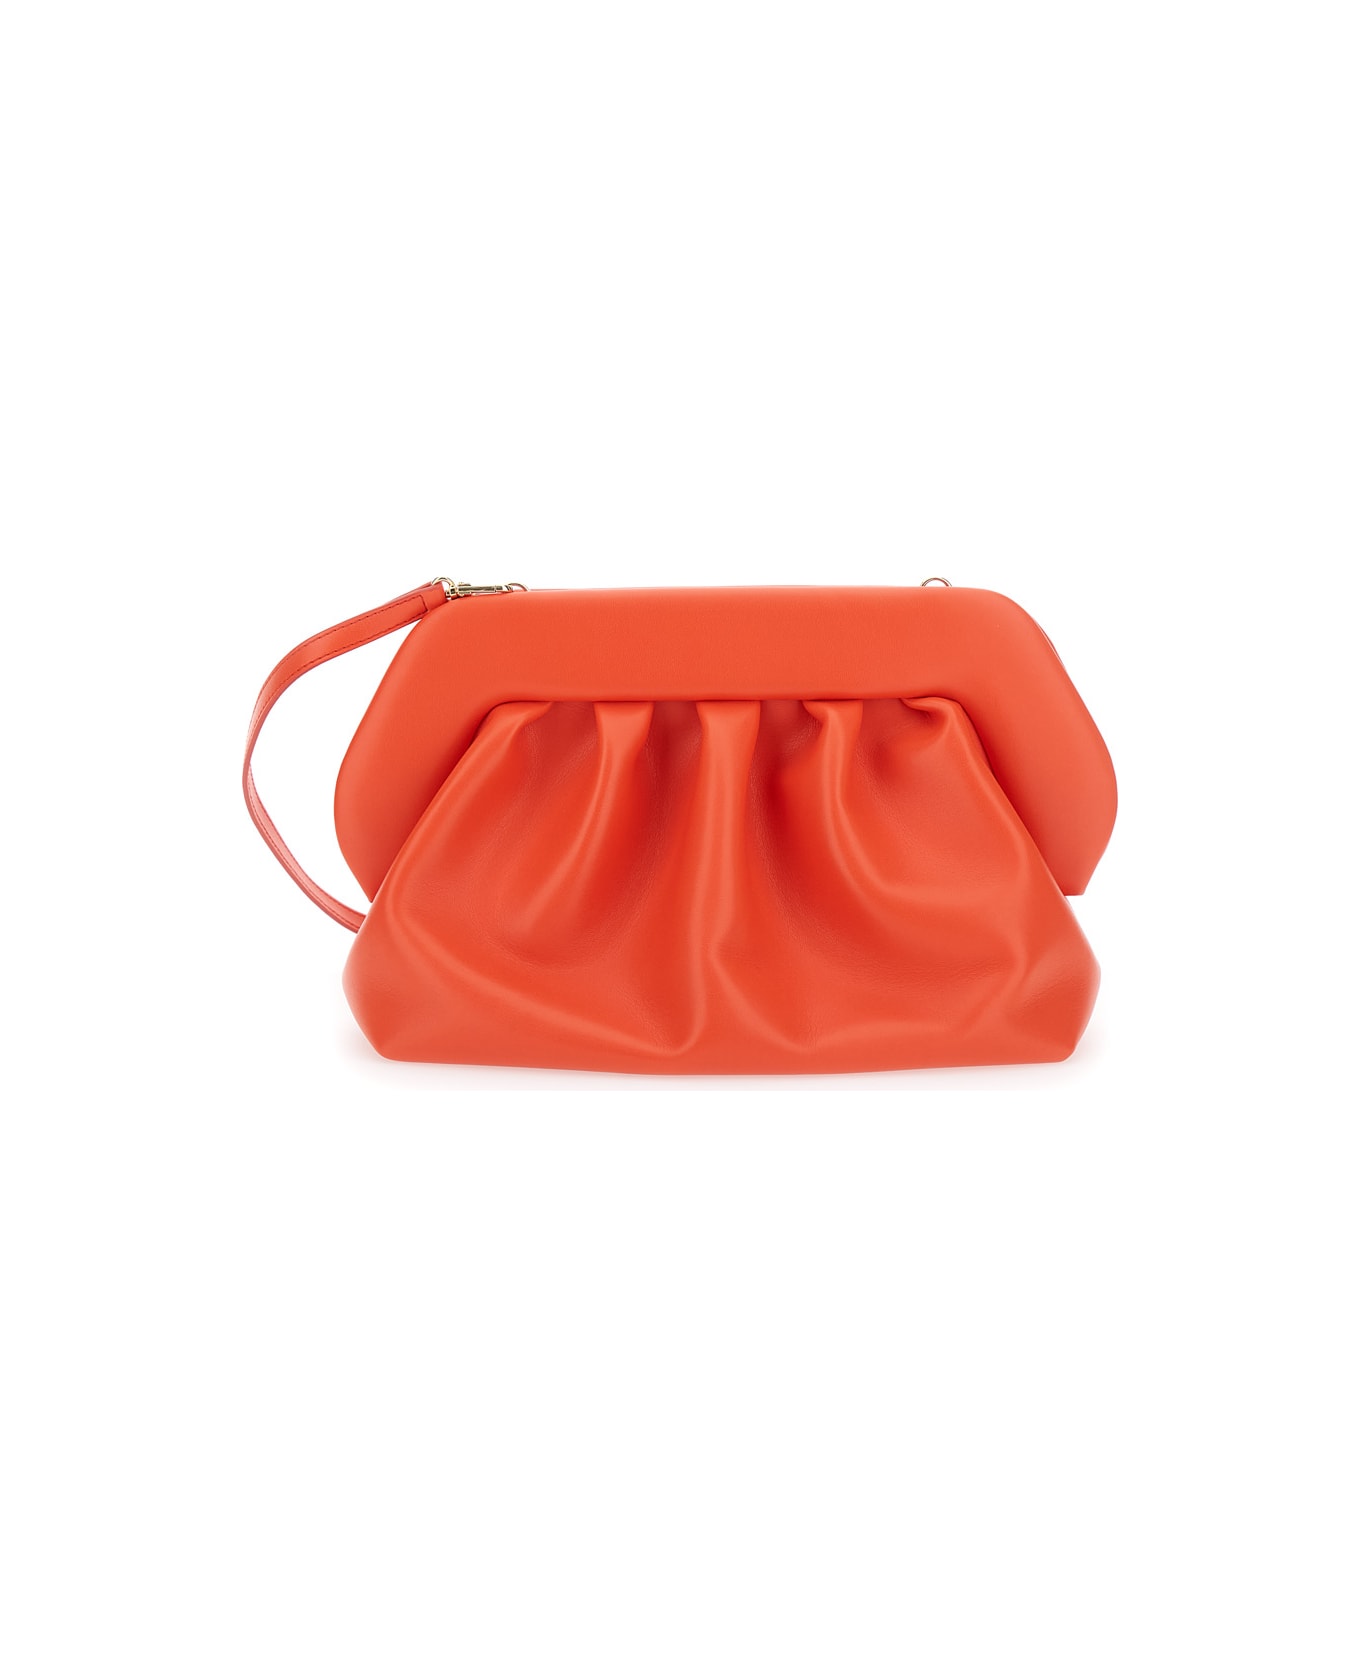 THEMOIRè Orange Clutch Bag With Magnetic Closure In Eco Leather Woman - Red